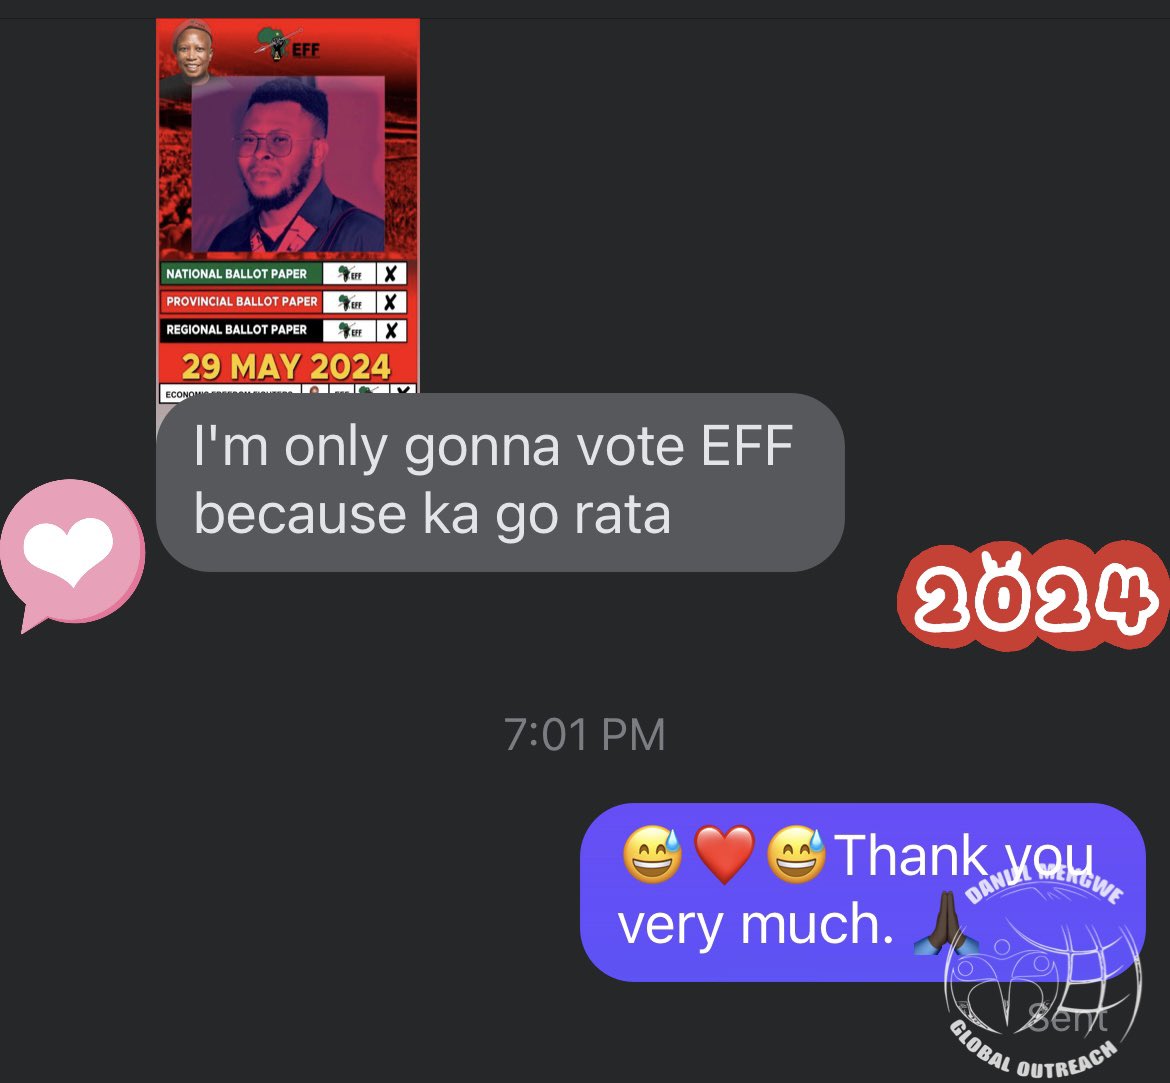 This thing of being an Award Winning International Crush 😻 is equally bringing Votes to The EFF 😅🔥❤️✊🏾#IamVotingEFF ✊🏾